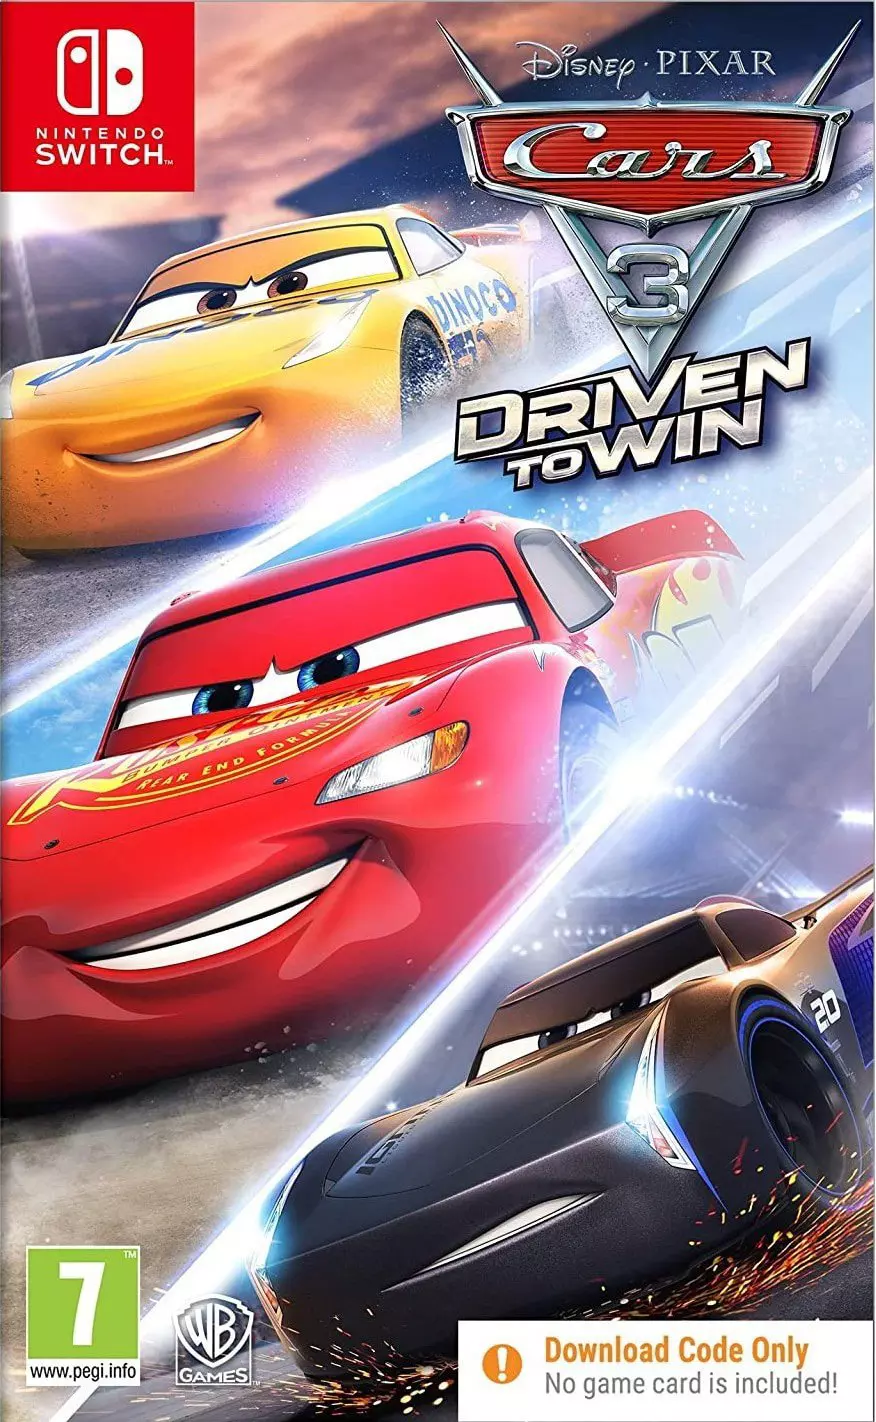 Cars : Driven To Win Code